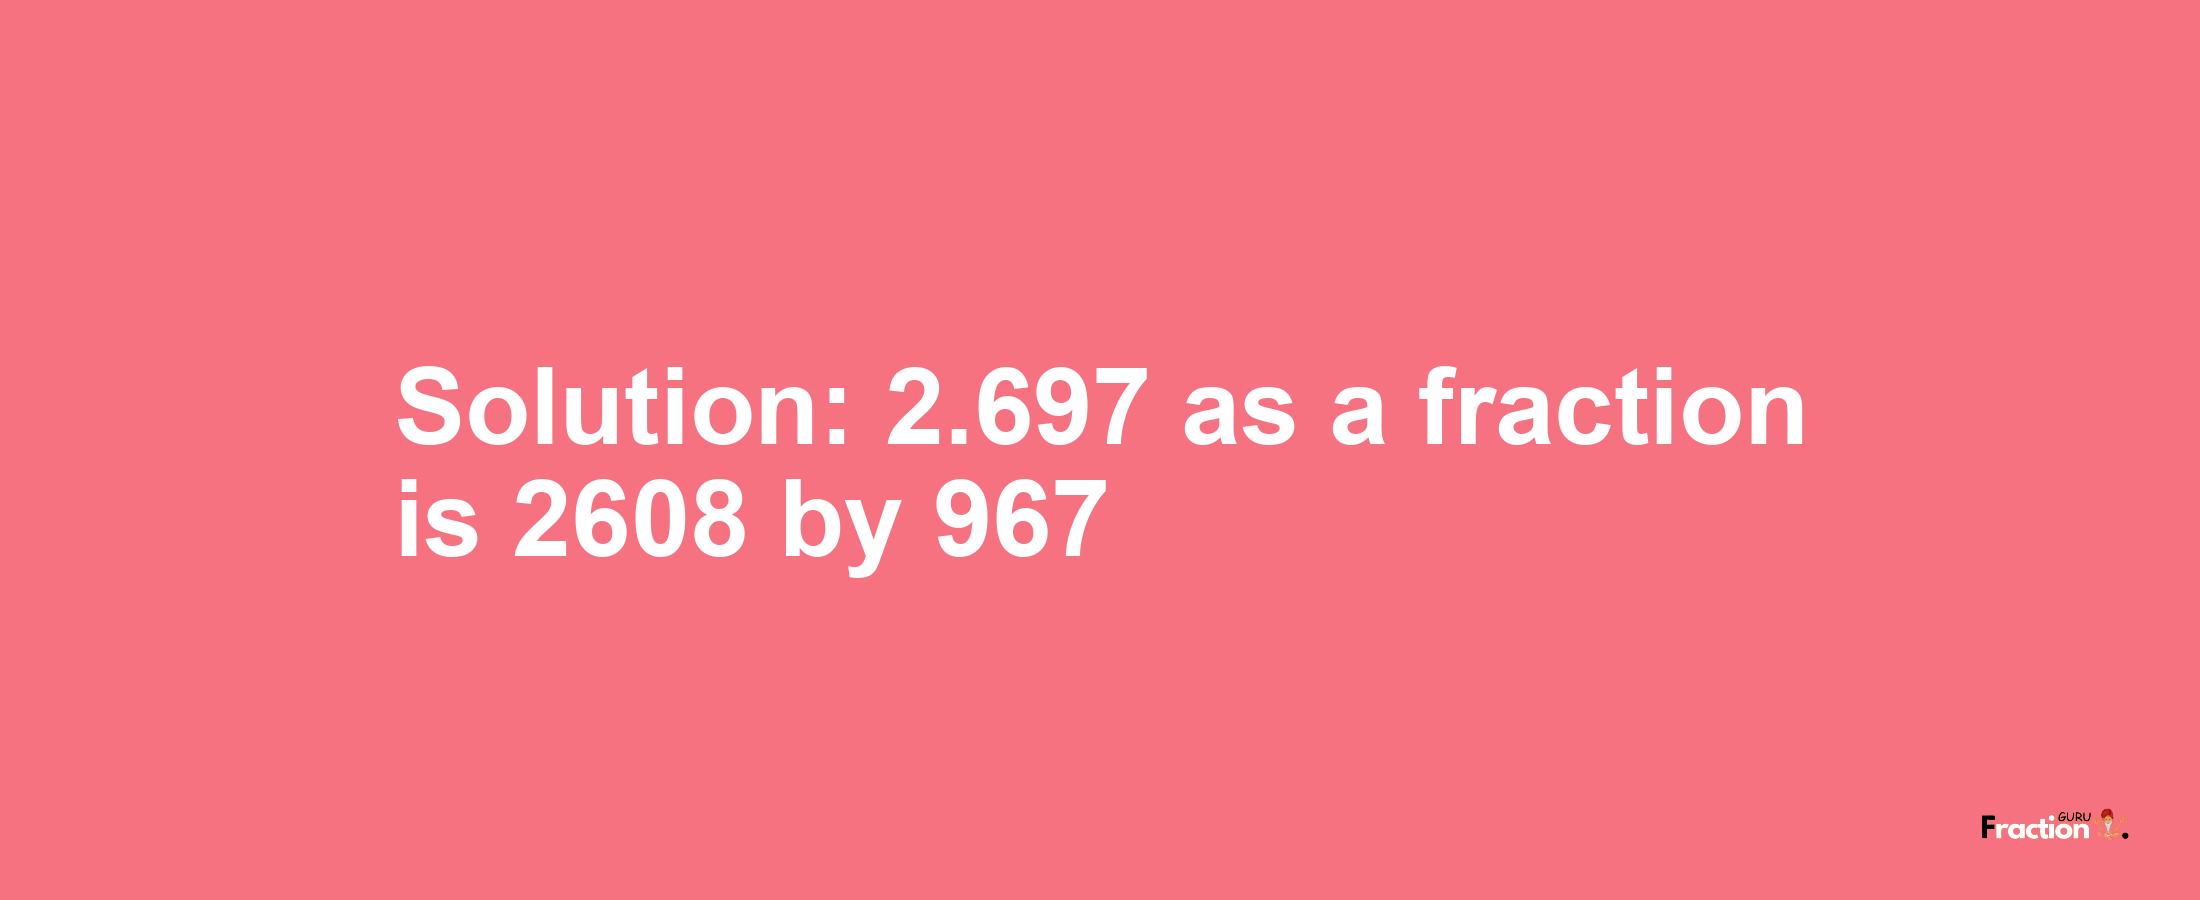 Solution:2.697 as a fraction is 2608/967